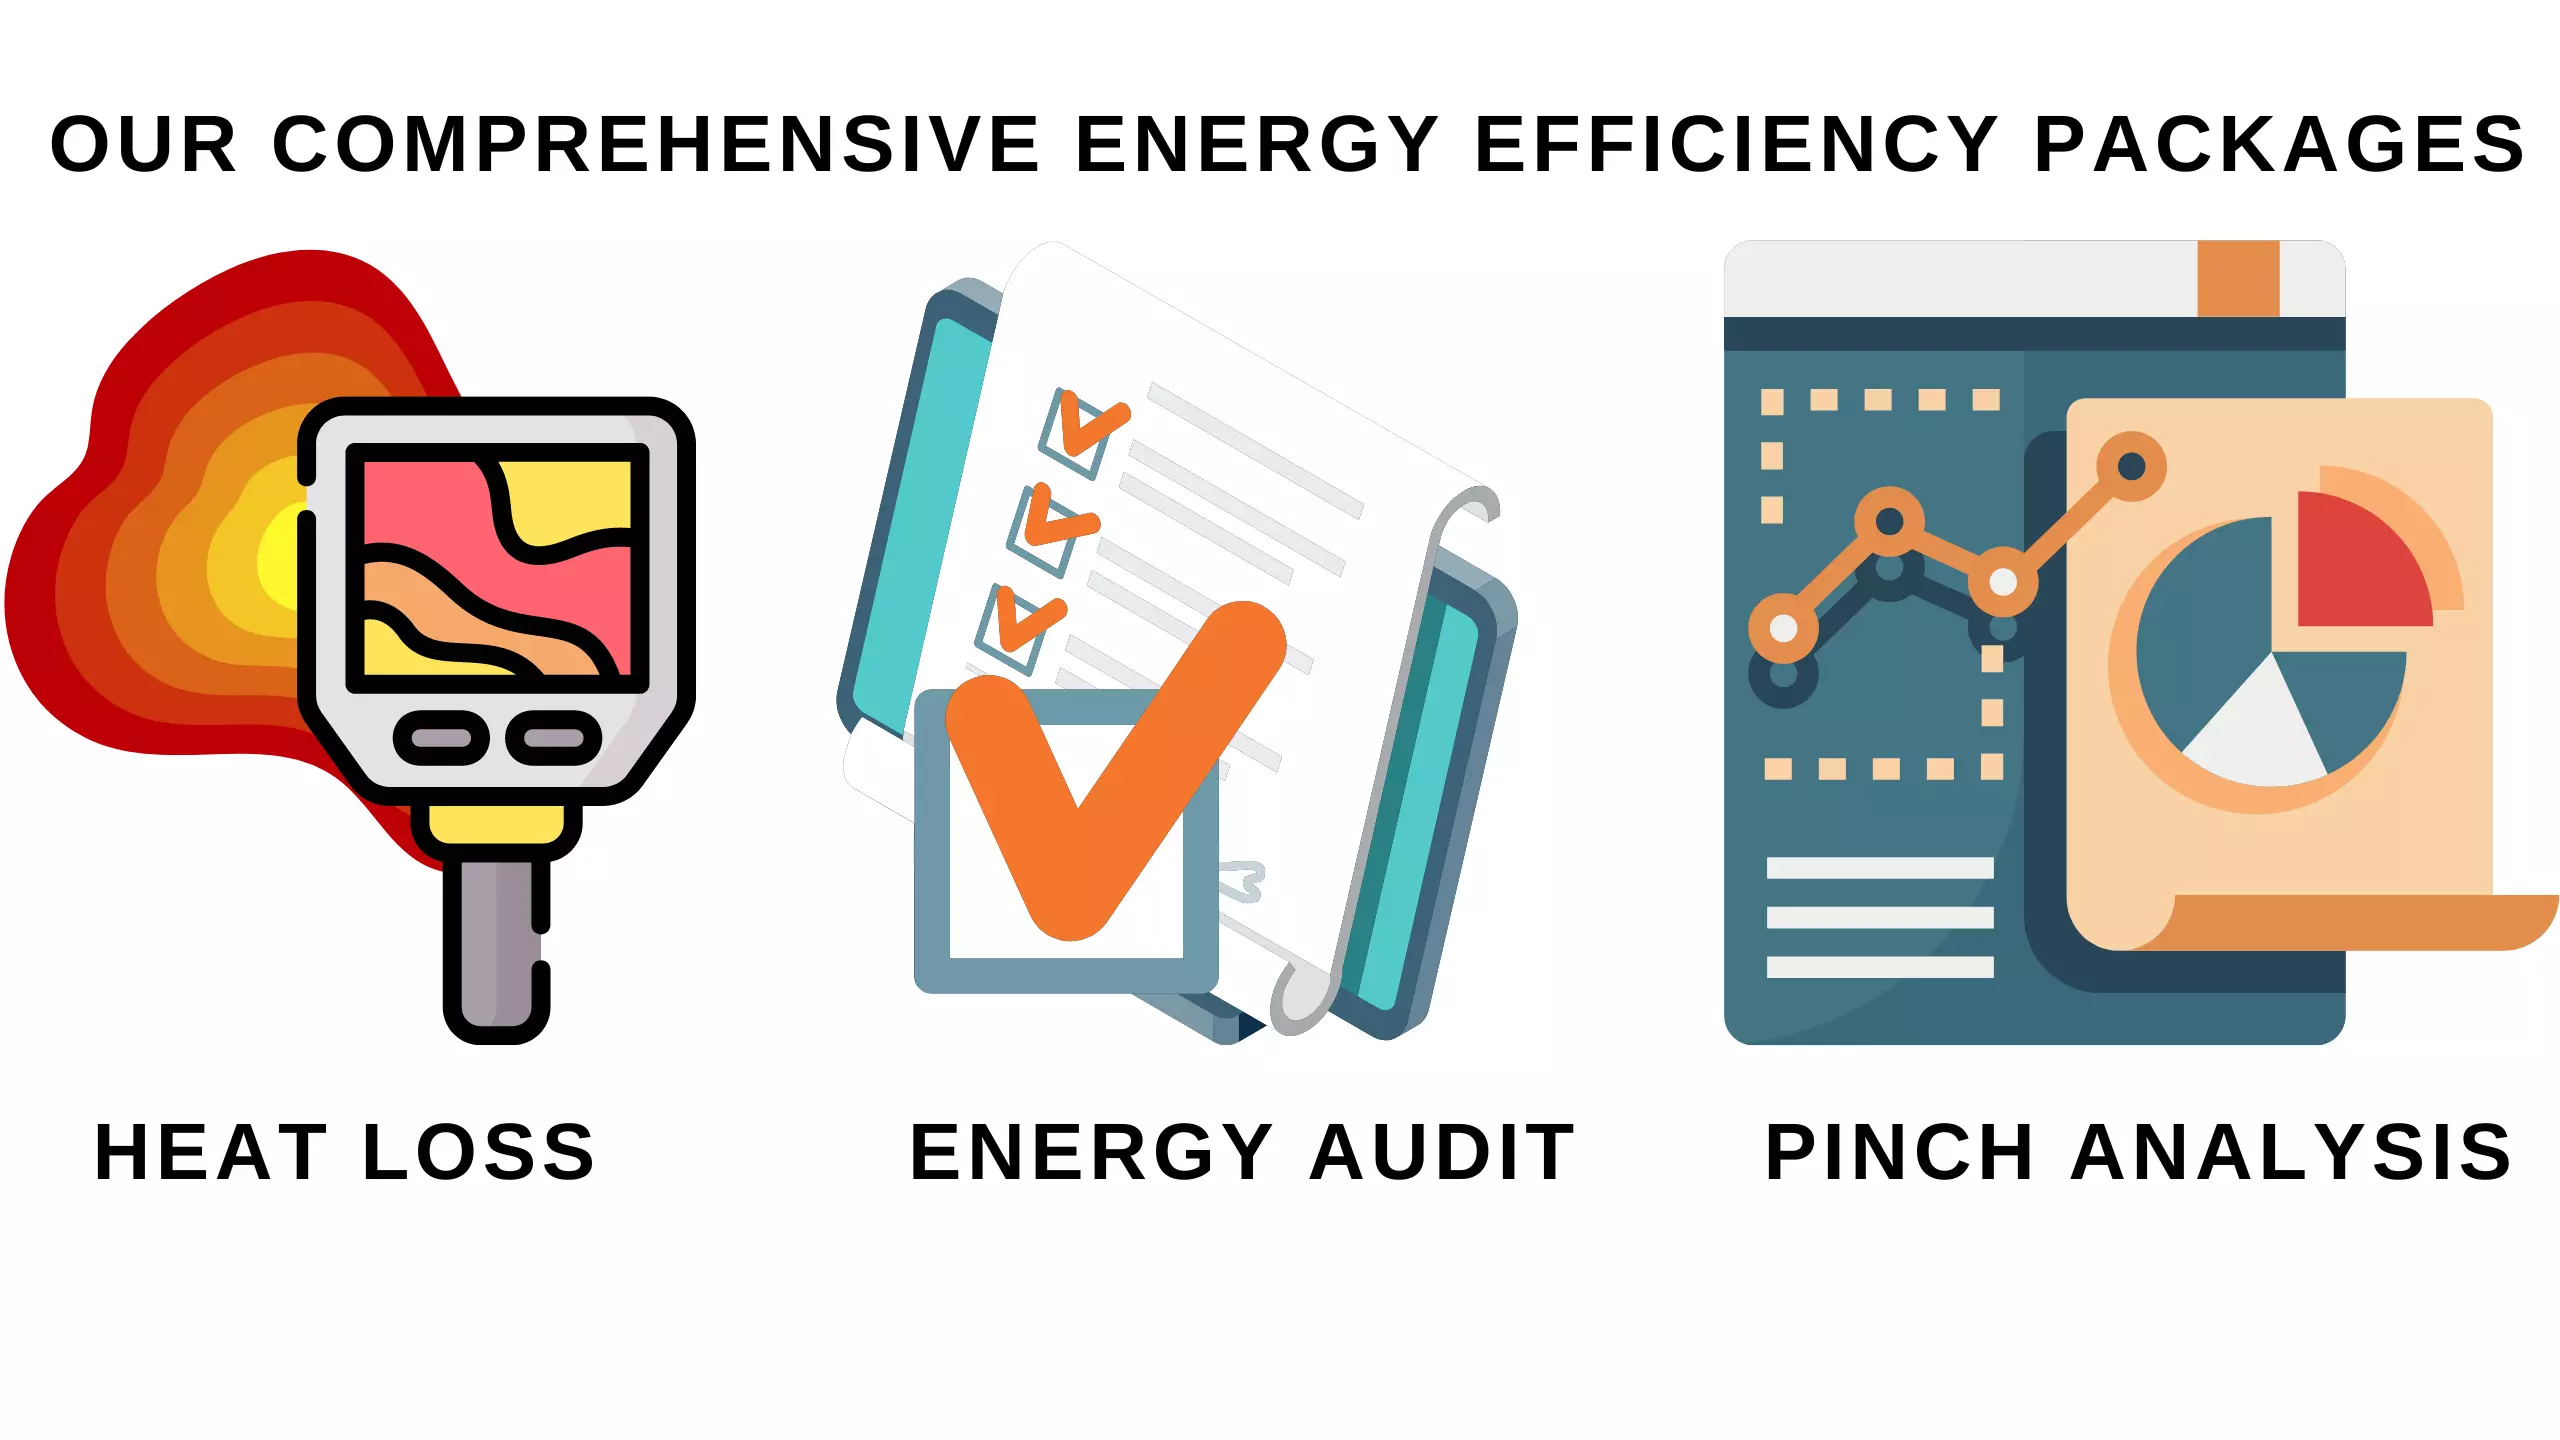 Our Comprehensive Energy Efficiency Packages